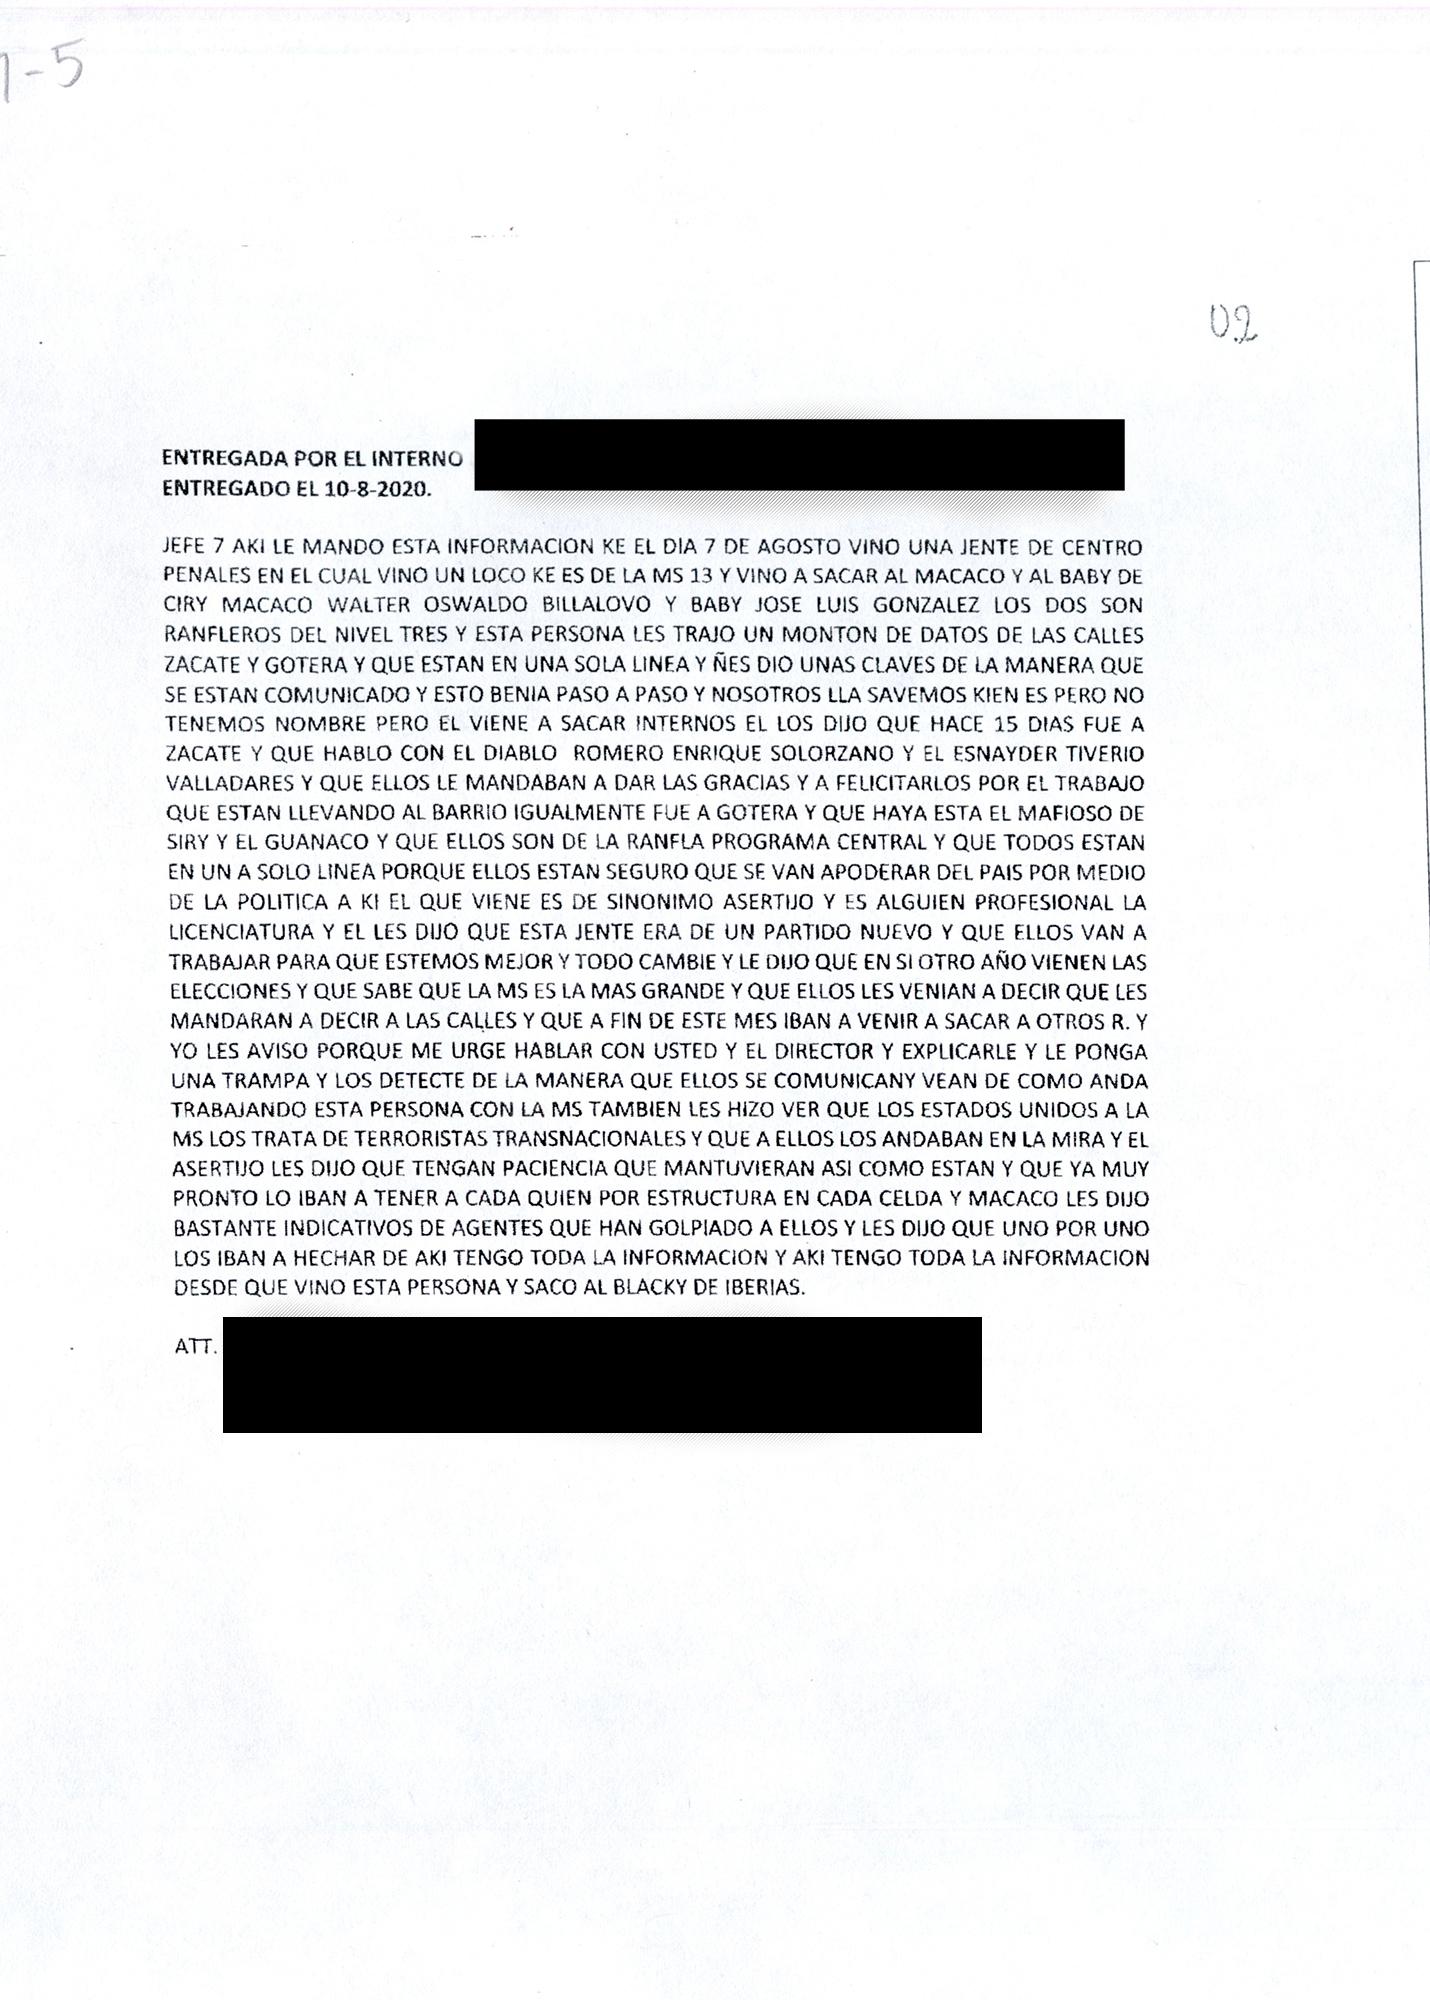 Transcript of one of the wilas recounting the events of August 7 in Phase III of Izalco. The image is part of a prison intelligence report that El Faro received together with other official documents.